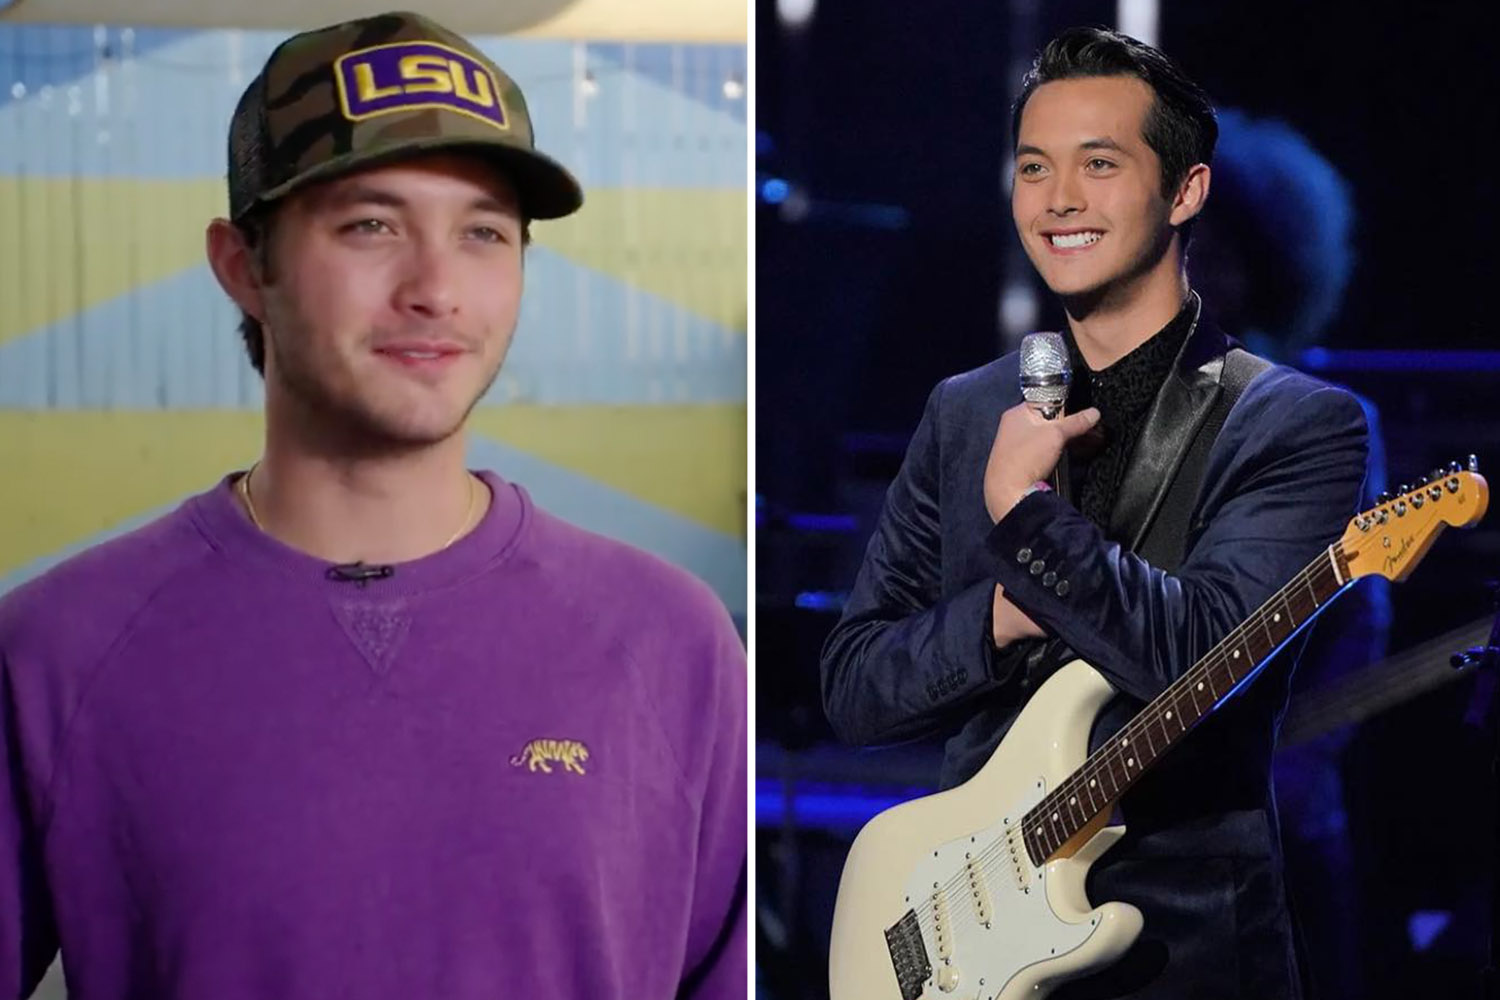 American Idol singer Laine Hardy probed by Louisiana State University police